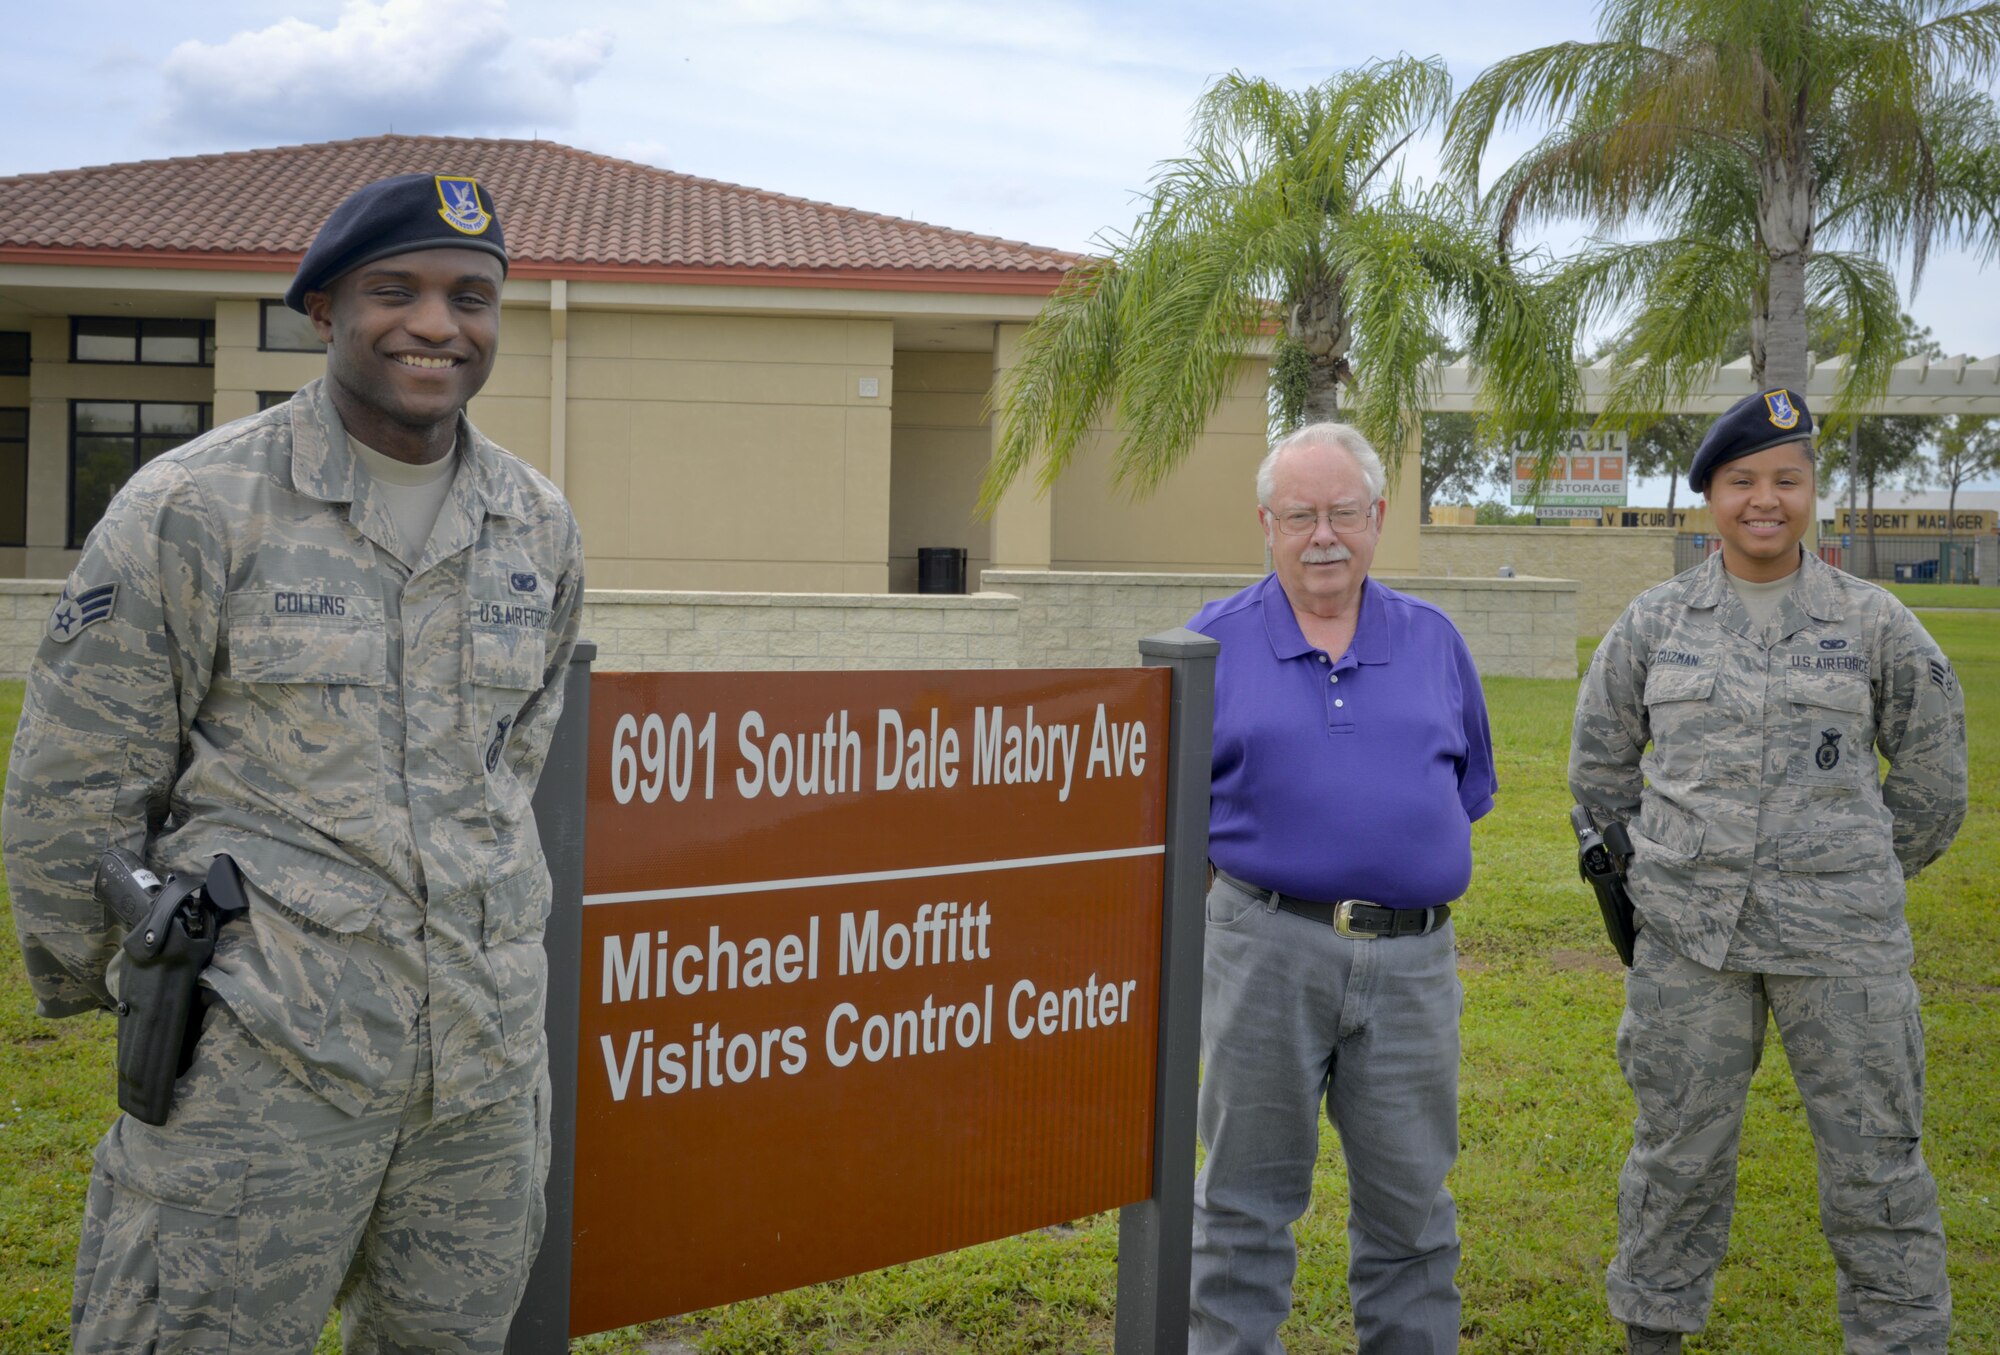 U.S Air Force security forces members pause for a photo outside of the visitor center at MacDill Air Force Base, Fla., Aug. 24, 2017. The visitor center is one of the base’s first lines of defense to preventing potential security threats from entering. (U.S. Air Force photo by Senior Airman Mariette Adams)